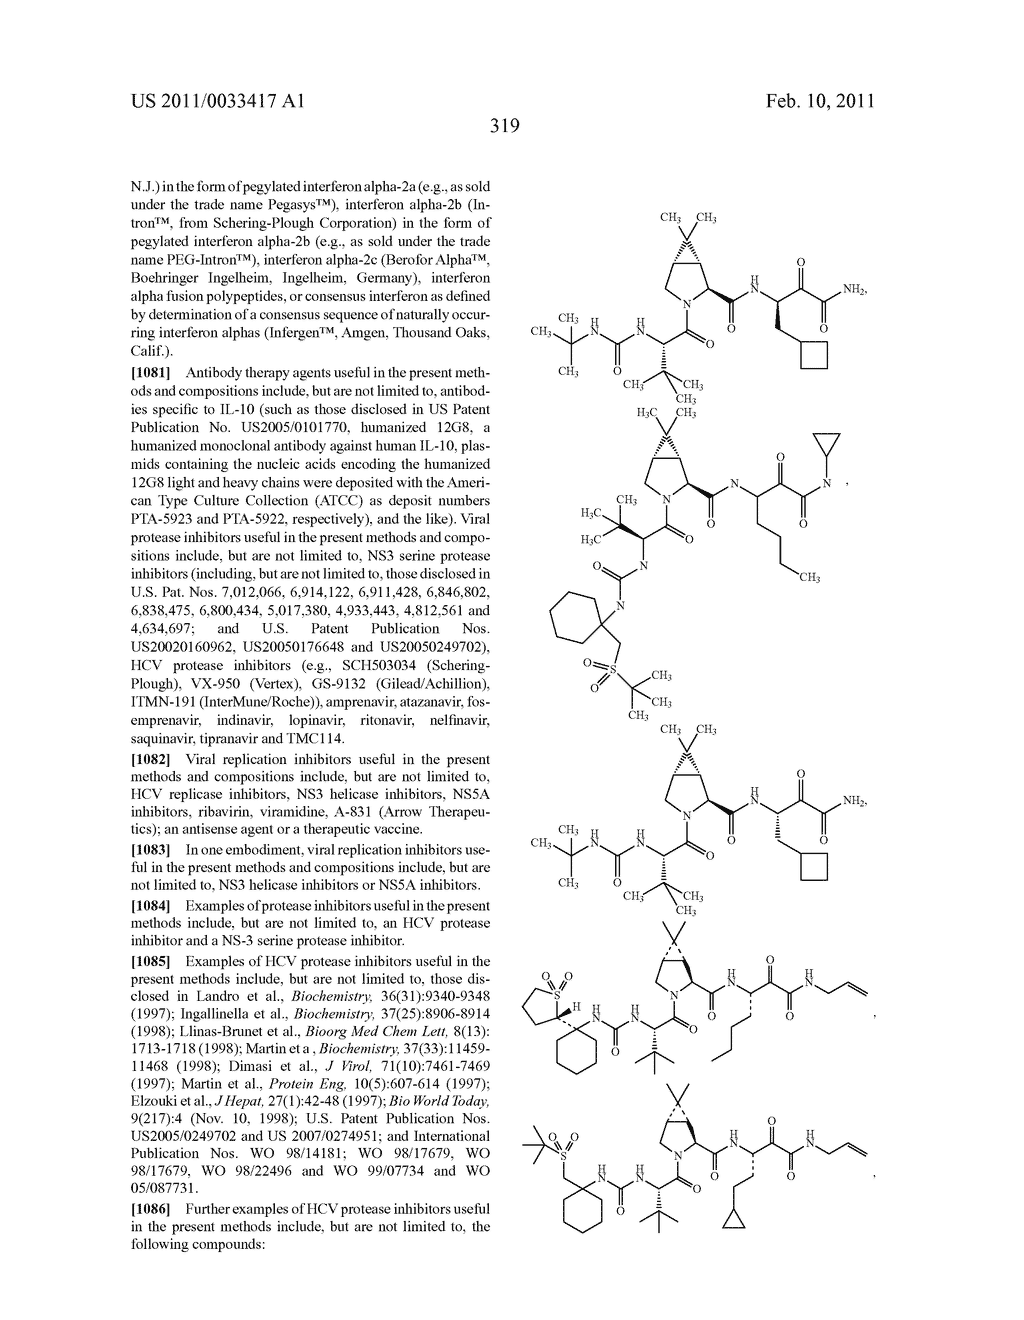 2,3-SUBSTITUTED INDOLE DERIVATIVES FOR TREATING VIRAL INFECTIONS - diagram, schematic, and image 320